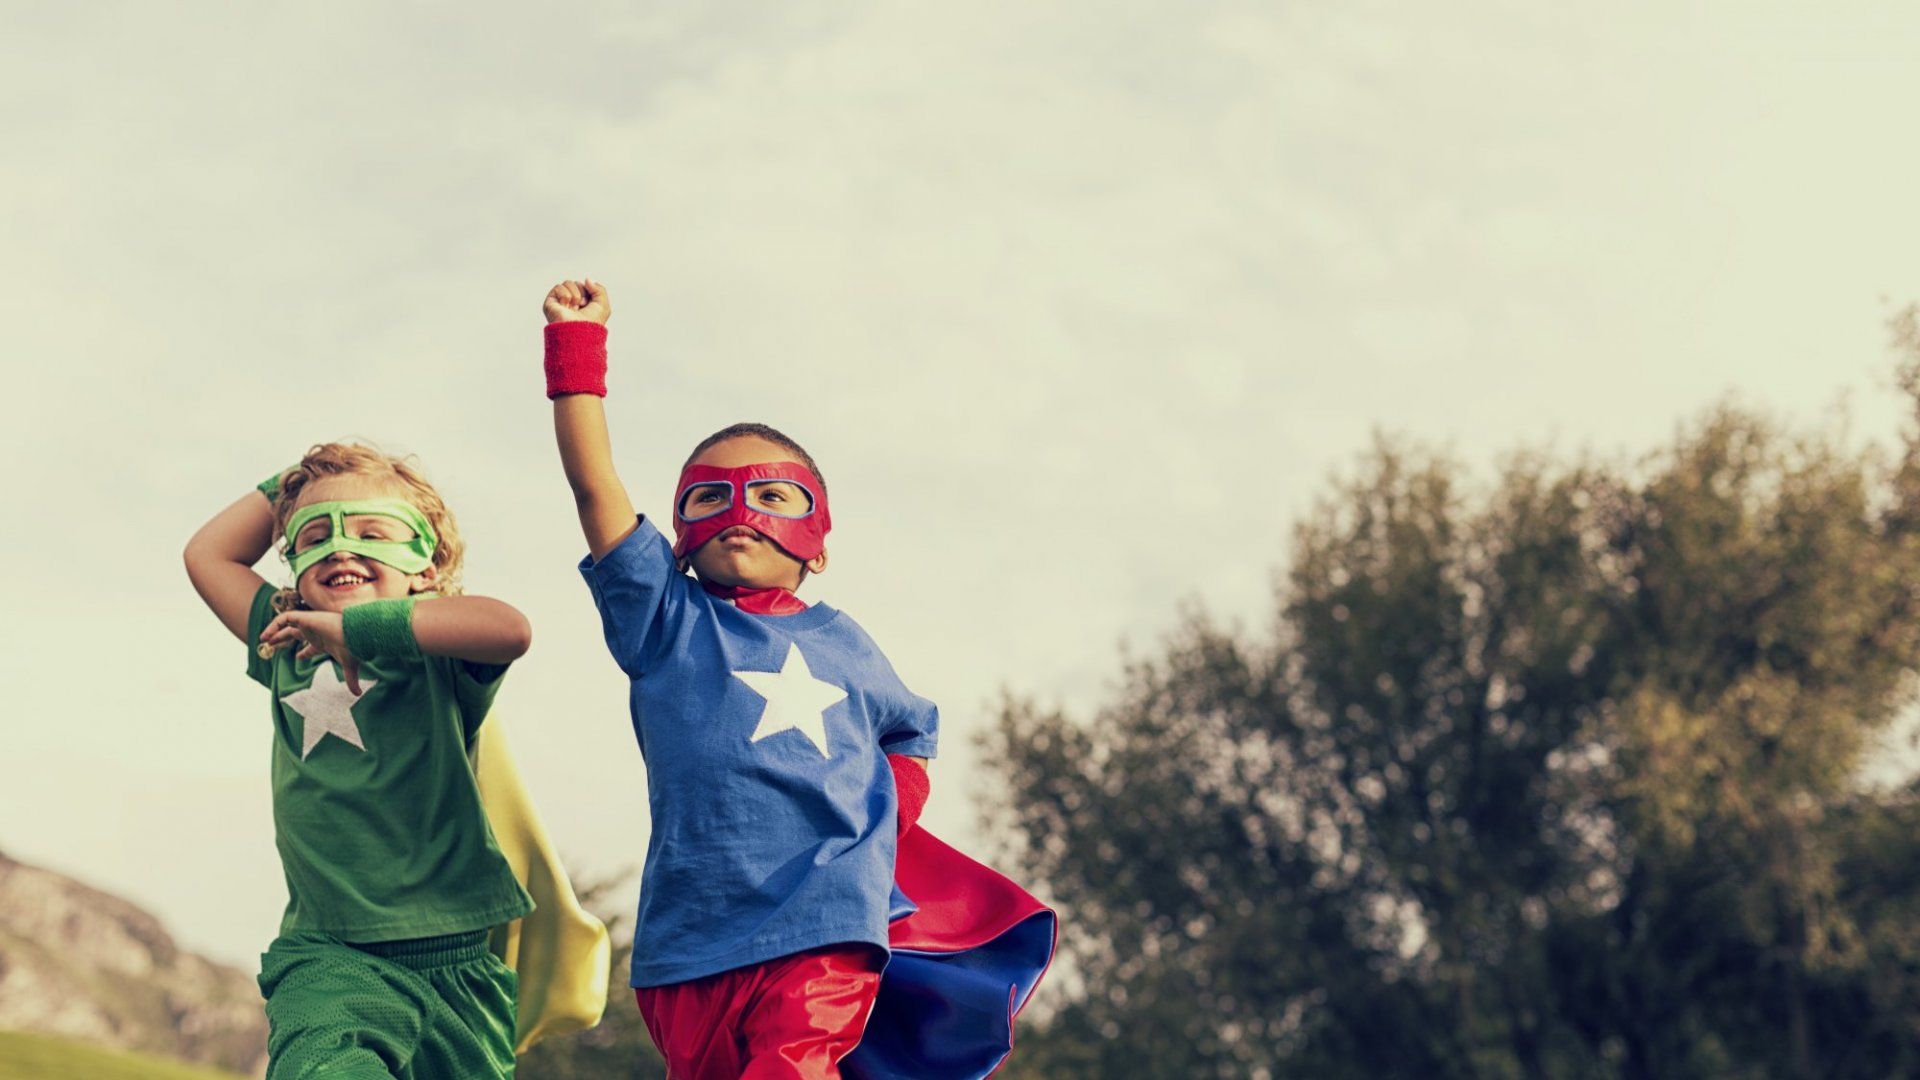 Superhero Quotes That Will Save the Day Whether You're a Leader or Not